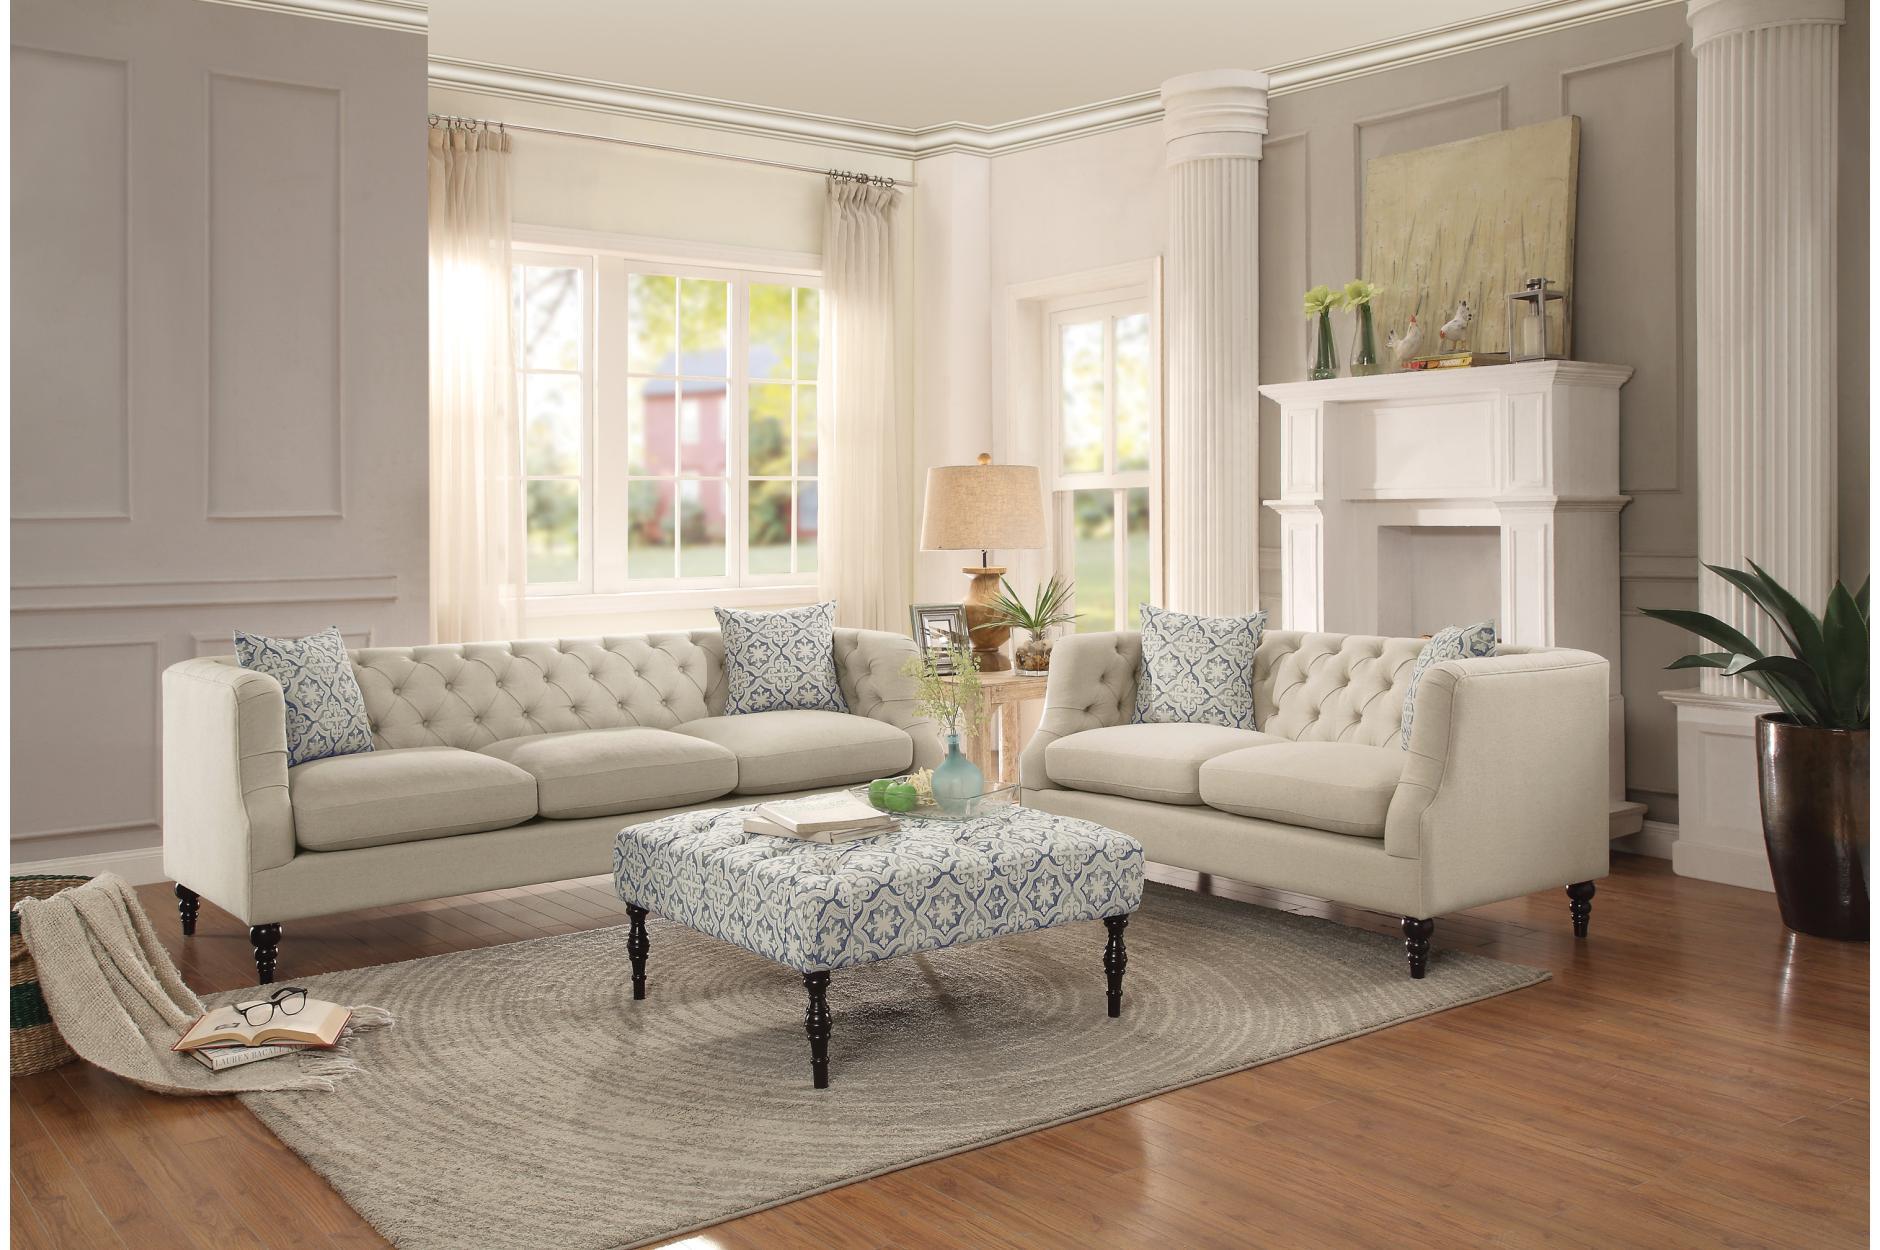 Contemporary, Casual, Transitional Sofa Set Radley 8324-324 in Beige Fabric